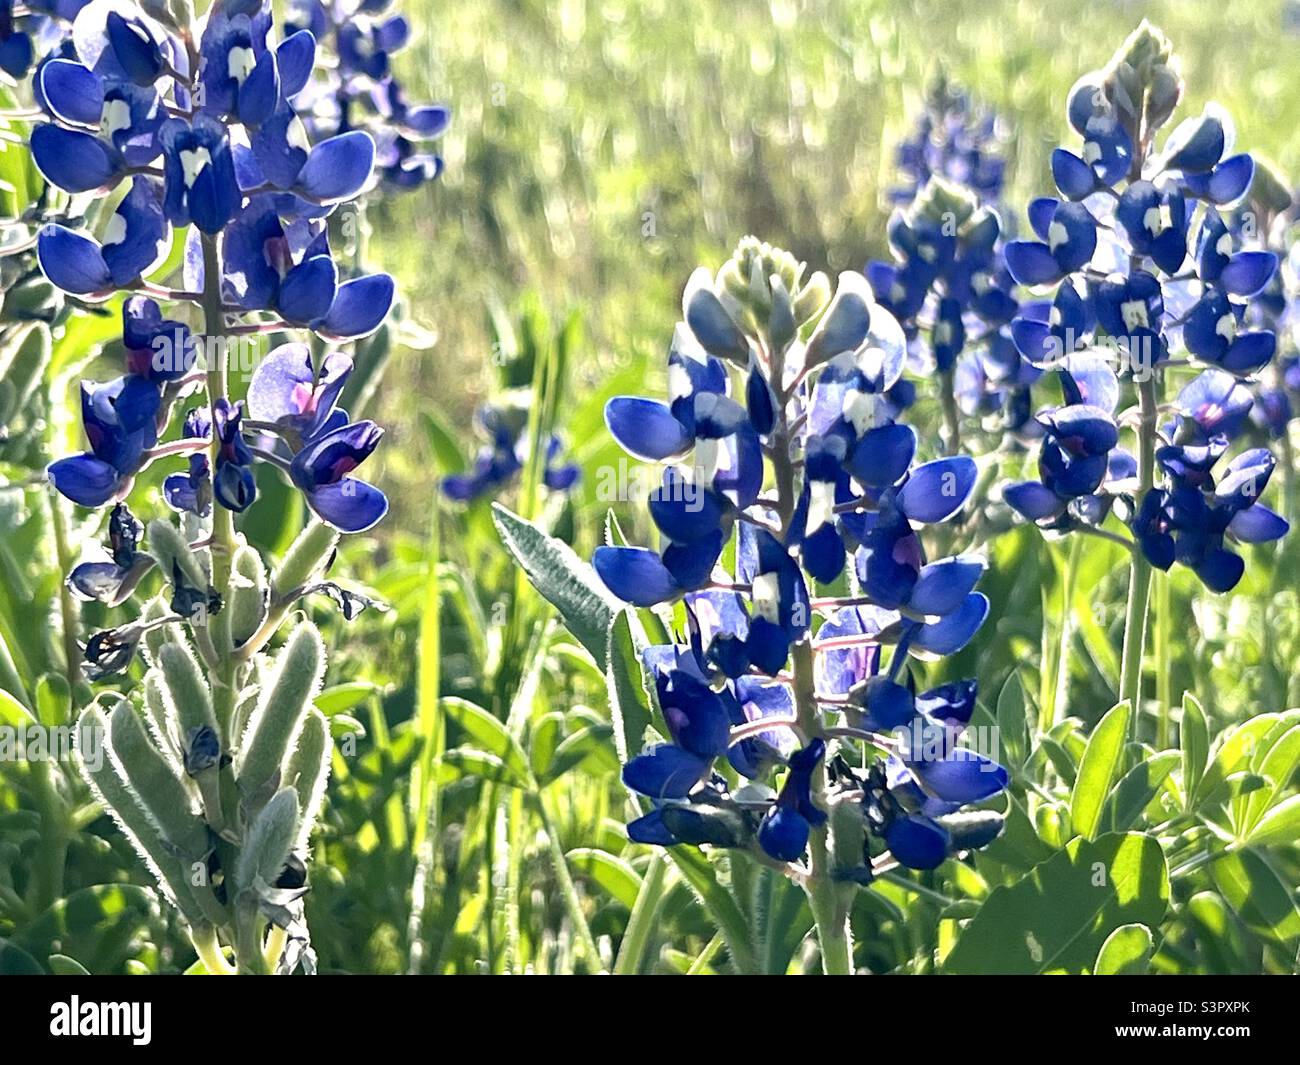 Bluebonnets with seed pods Stock Photo